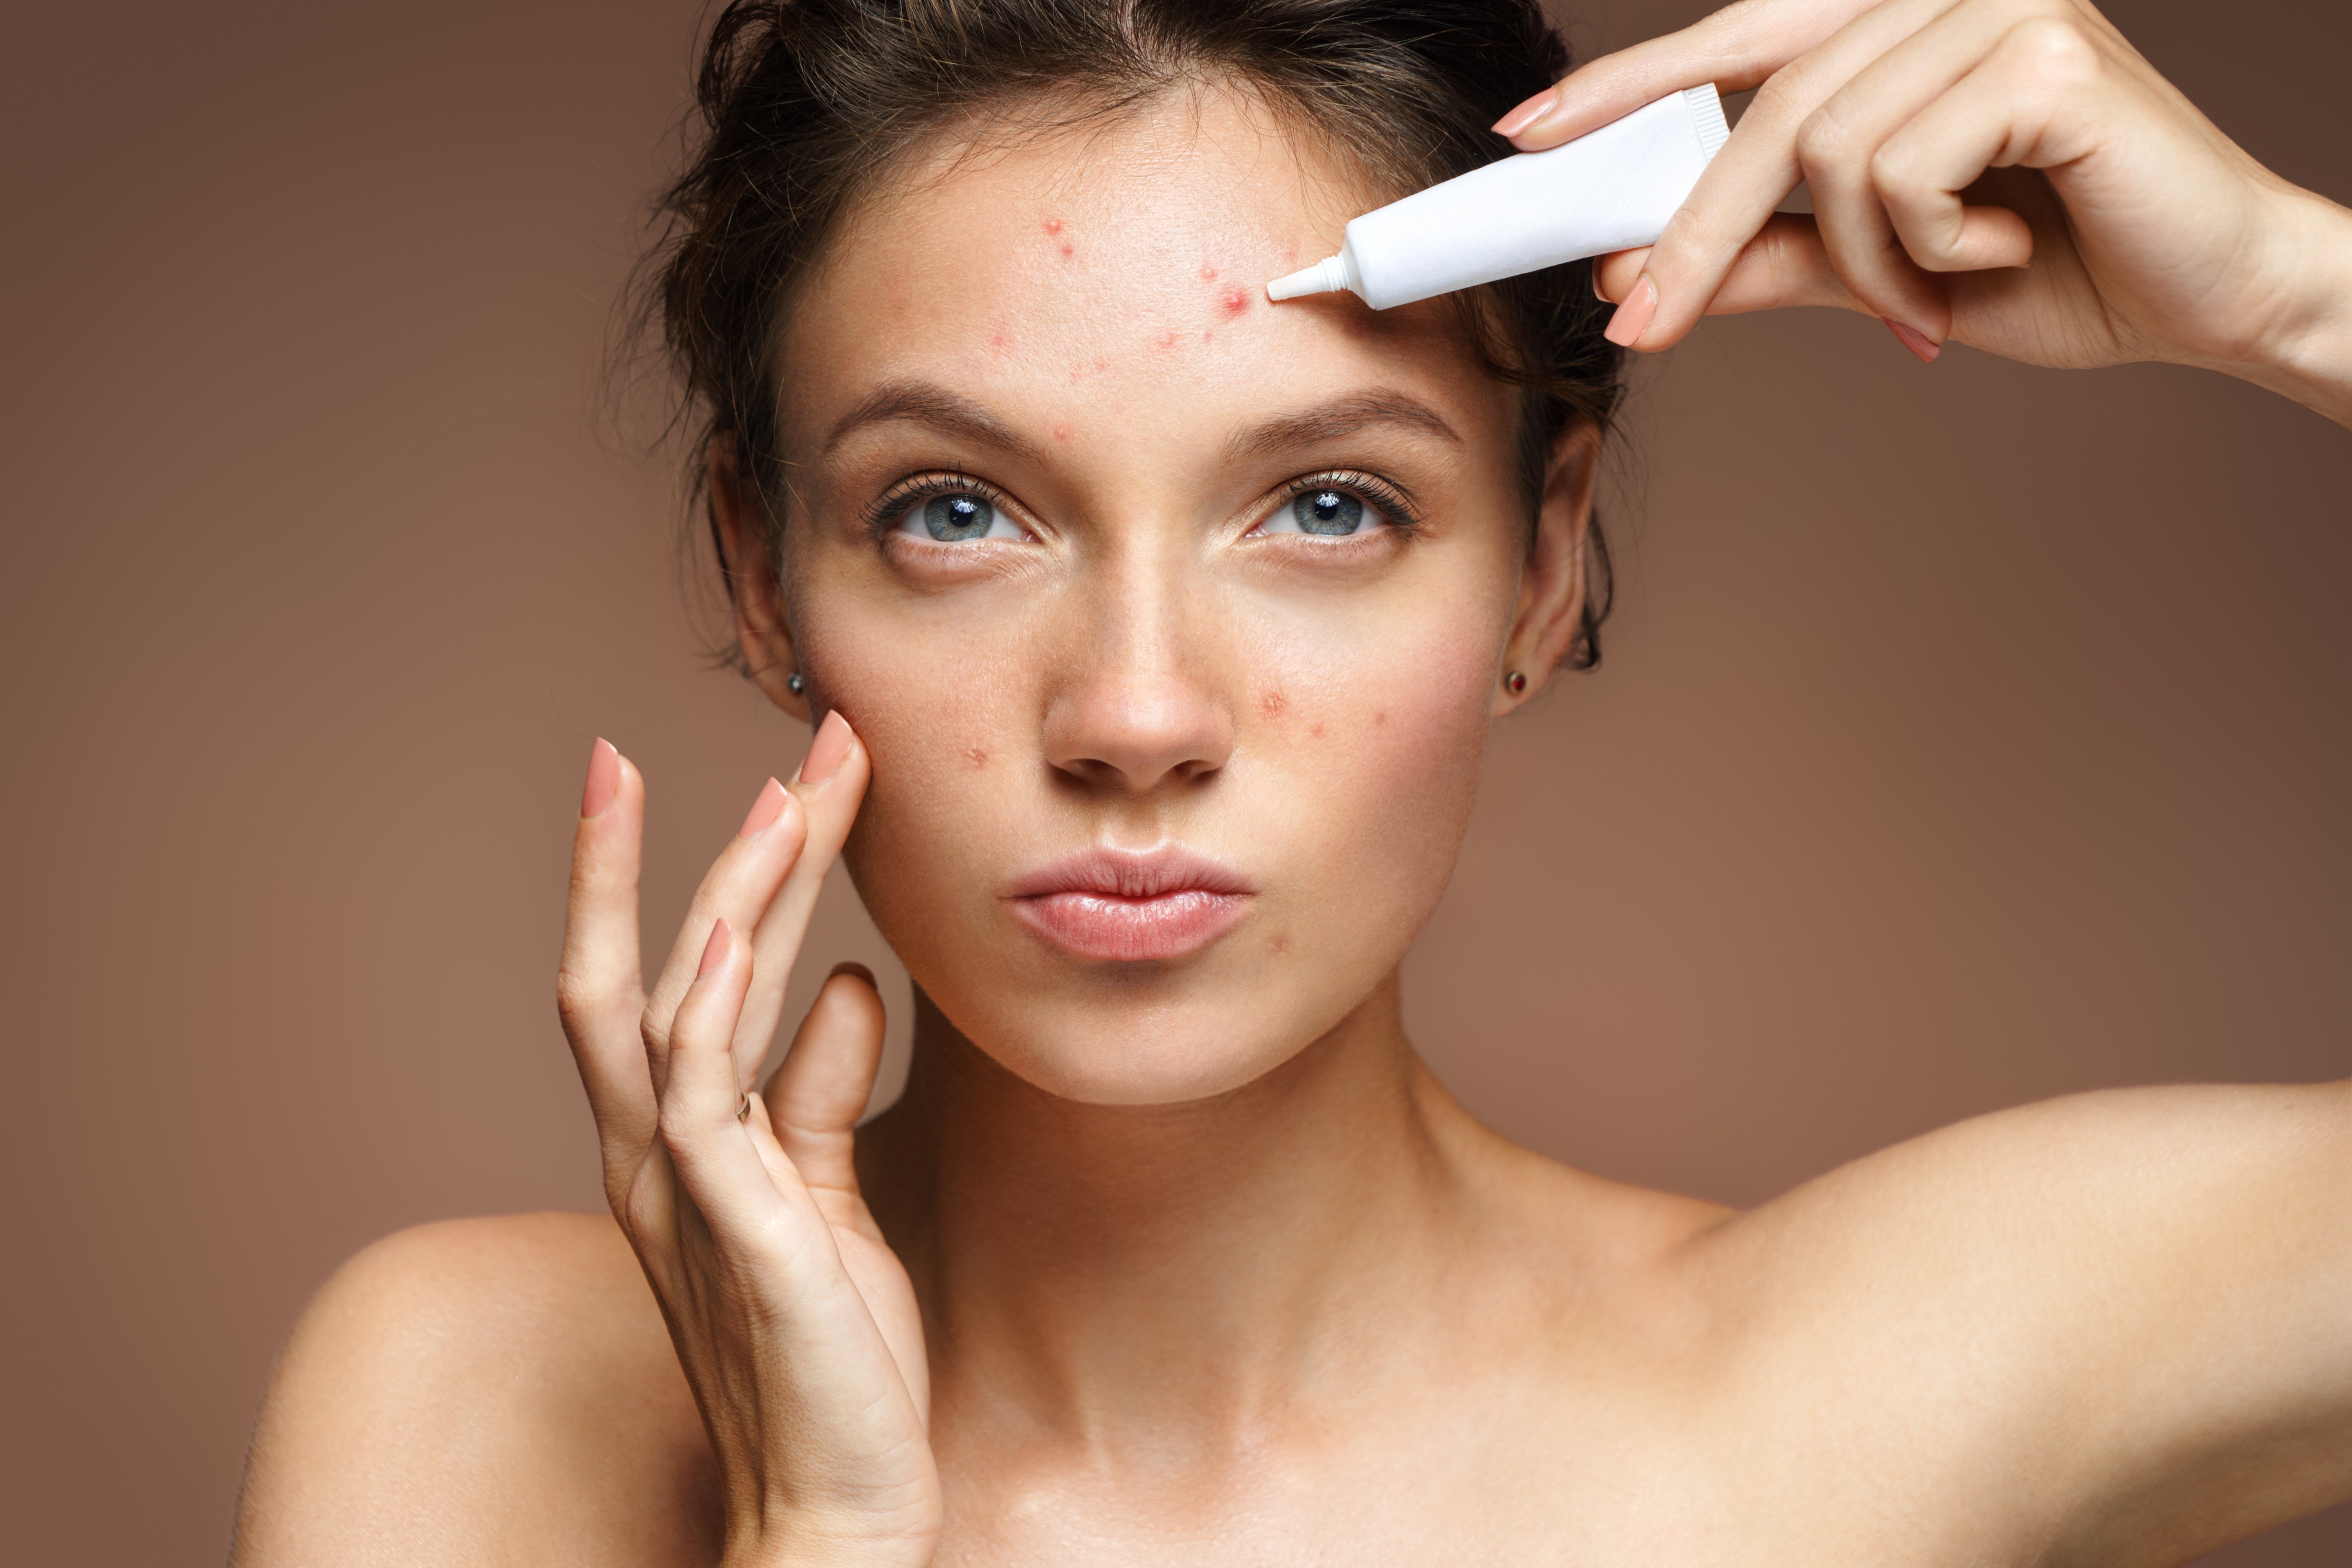 A woman treating her breakouts | Source: Shutterstock